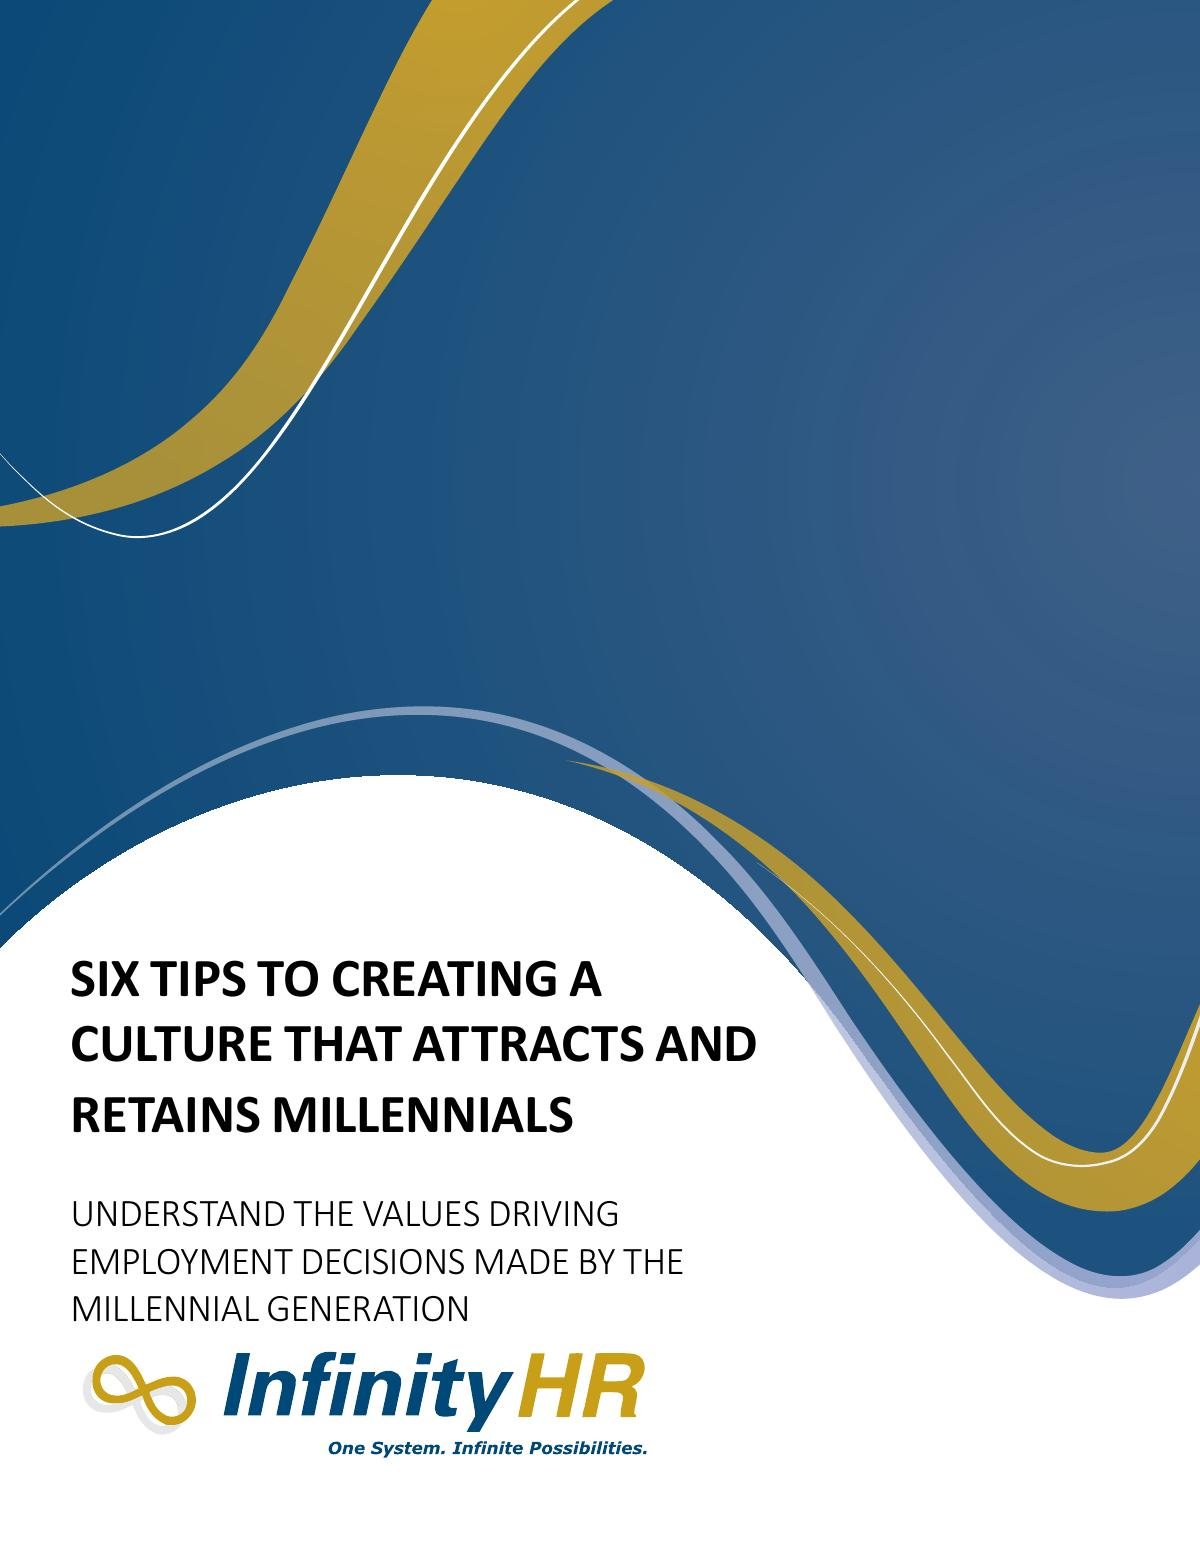 Six Tips to Creating a Culture that Attracts and Retains Millennials